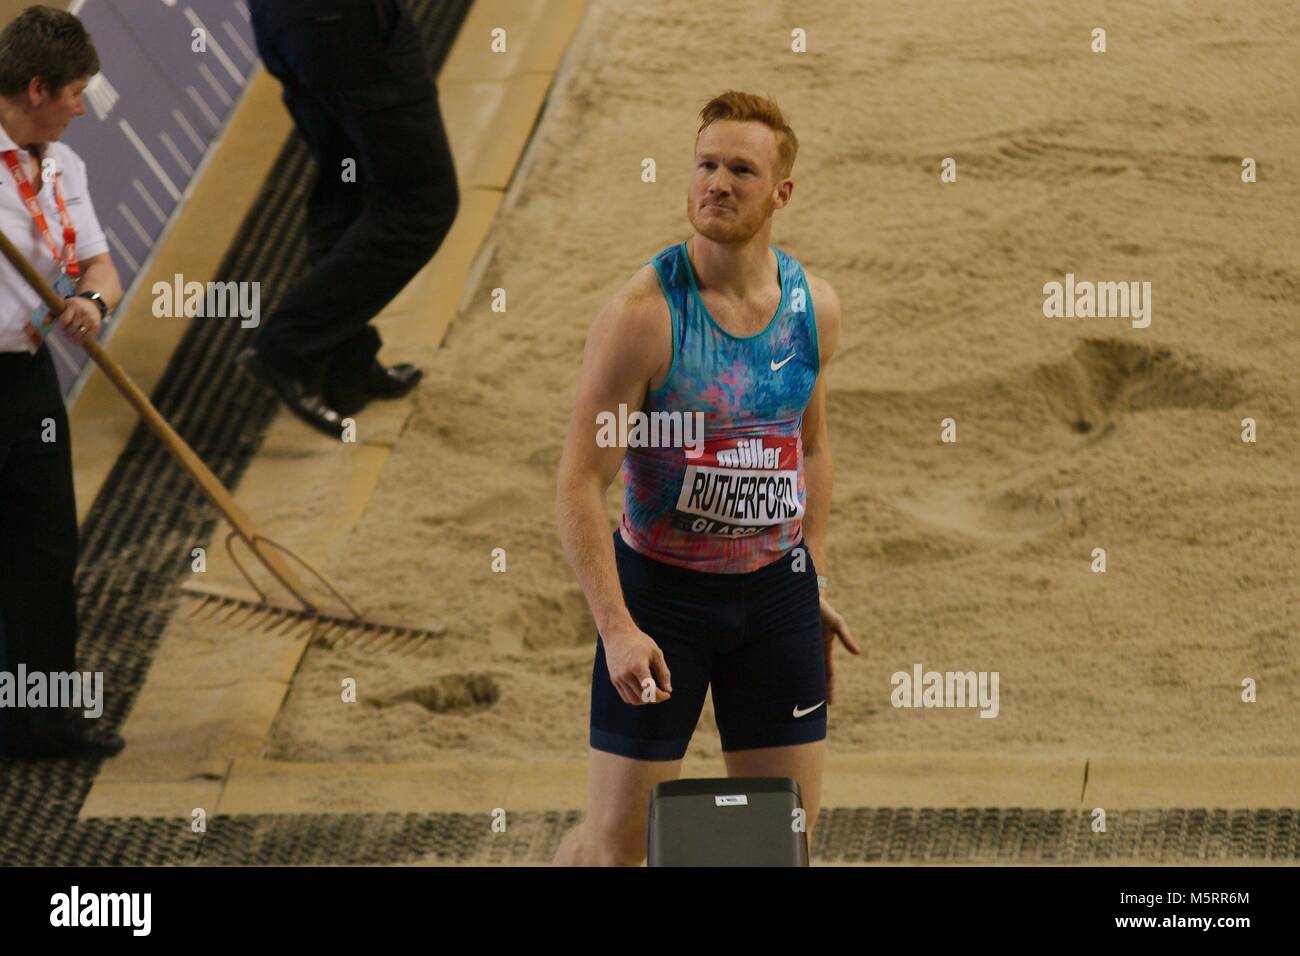 Glasgow, Scotland, 25 February 2018. Greg Rutherford checks the big screen after jumping in the long jump at the Muller Indoor Games in Glasgow. Credit: Colin Edwards/Alamy Live News. Stock Photo